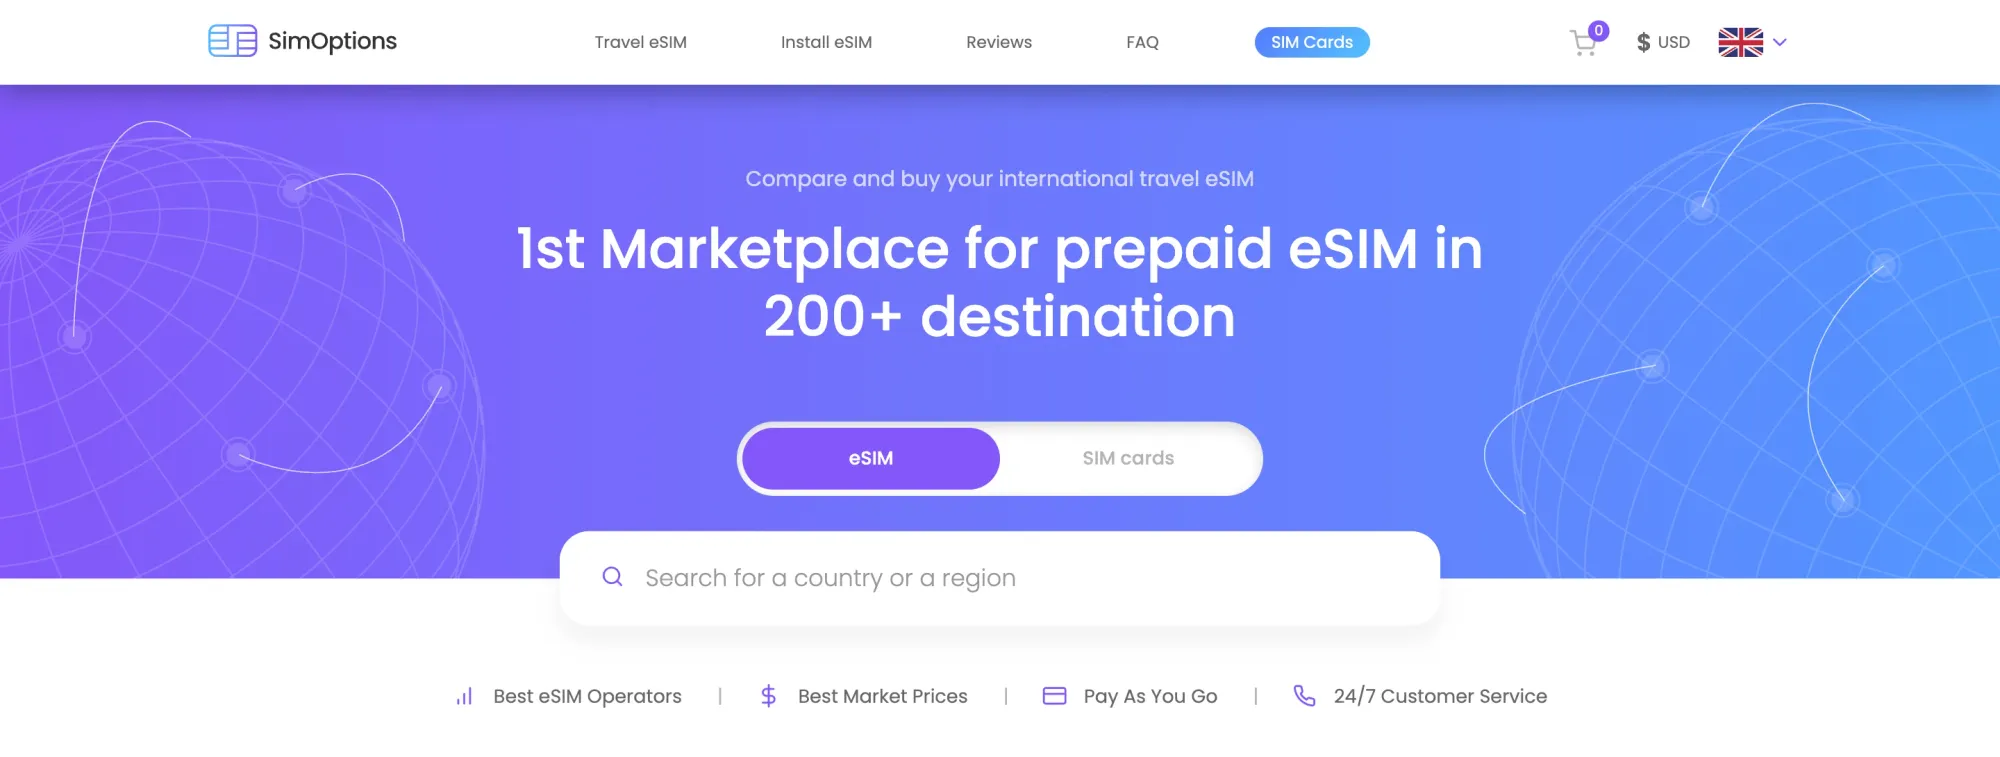 SimOptions is the first marketplace for prepaid eSIM in 200+ destinations